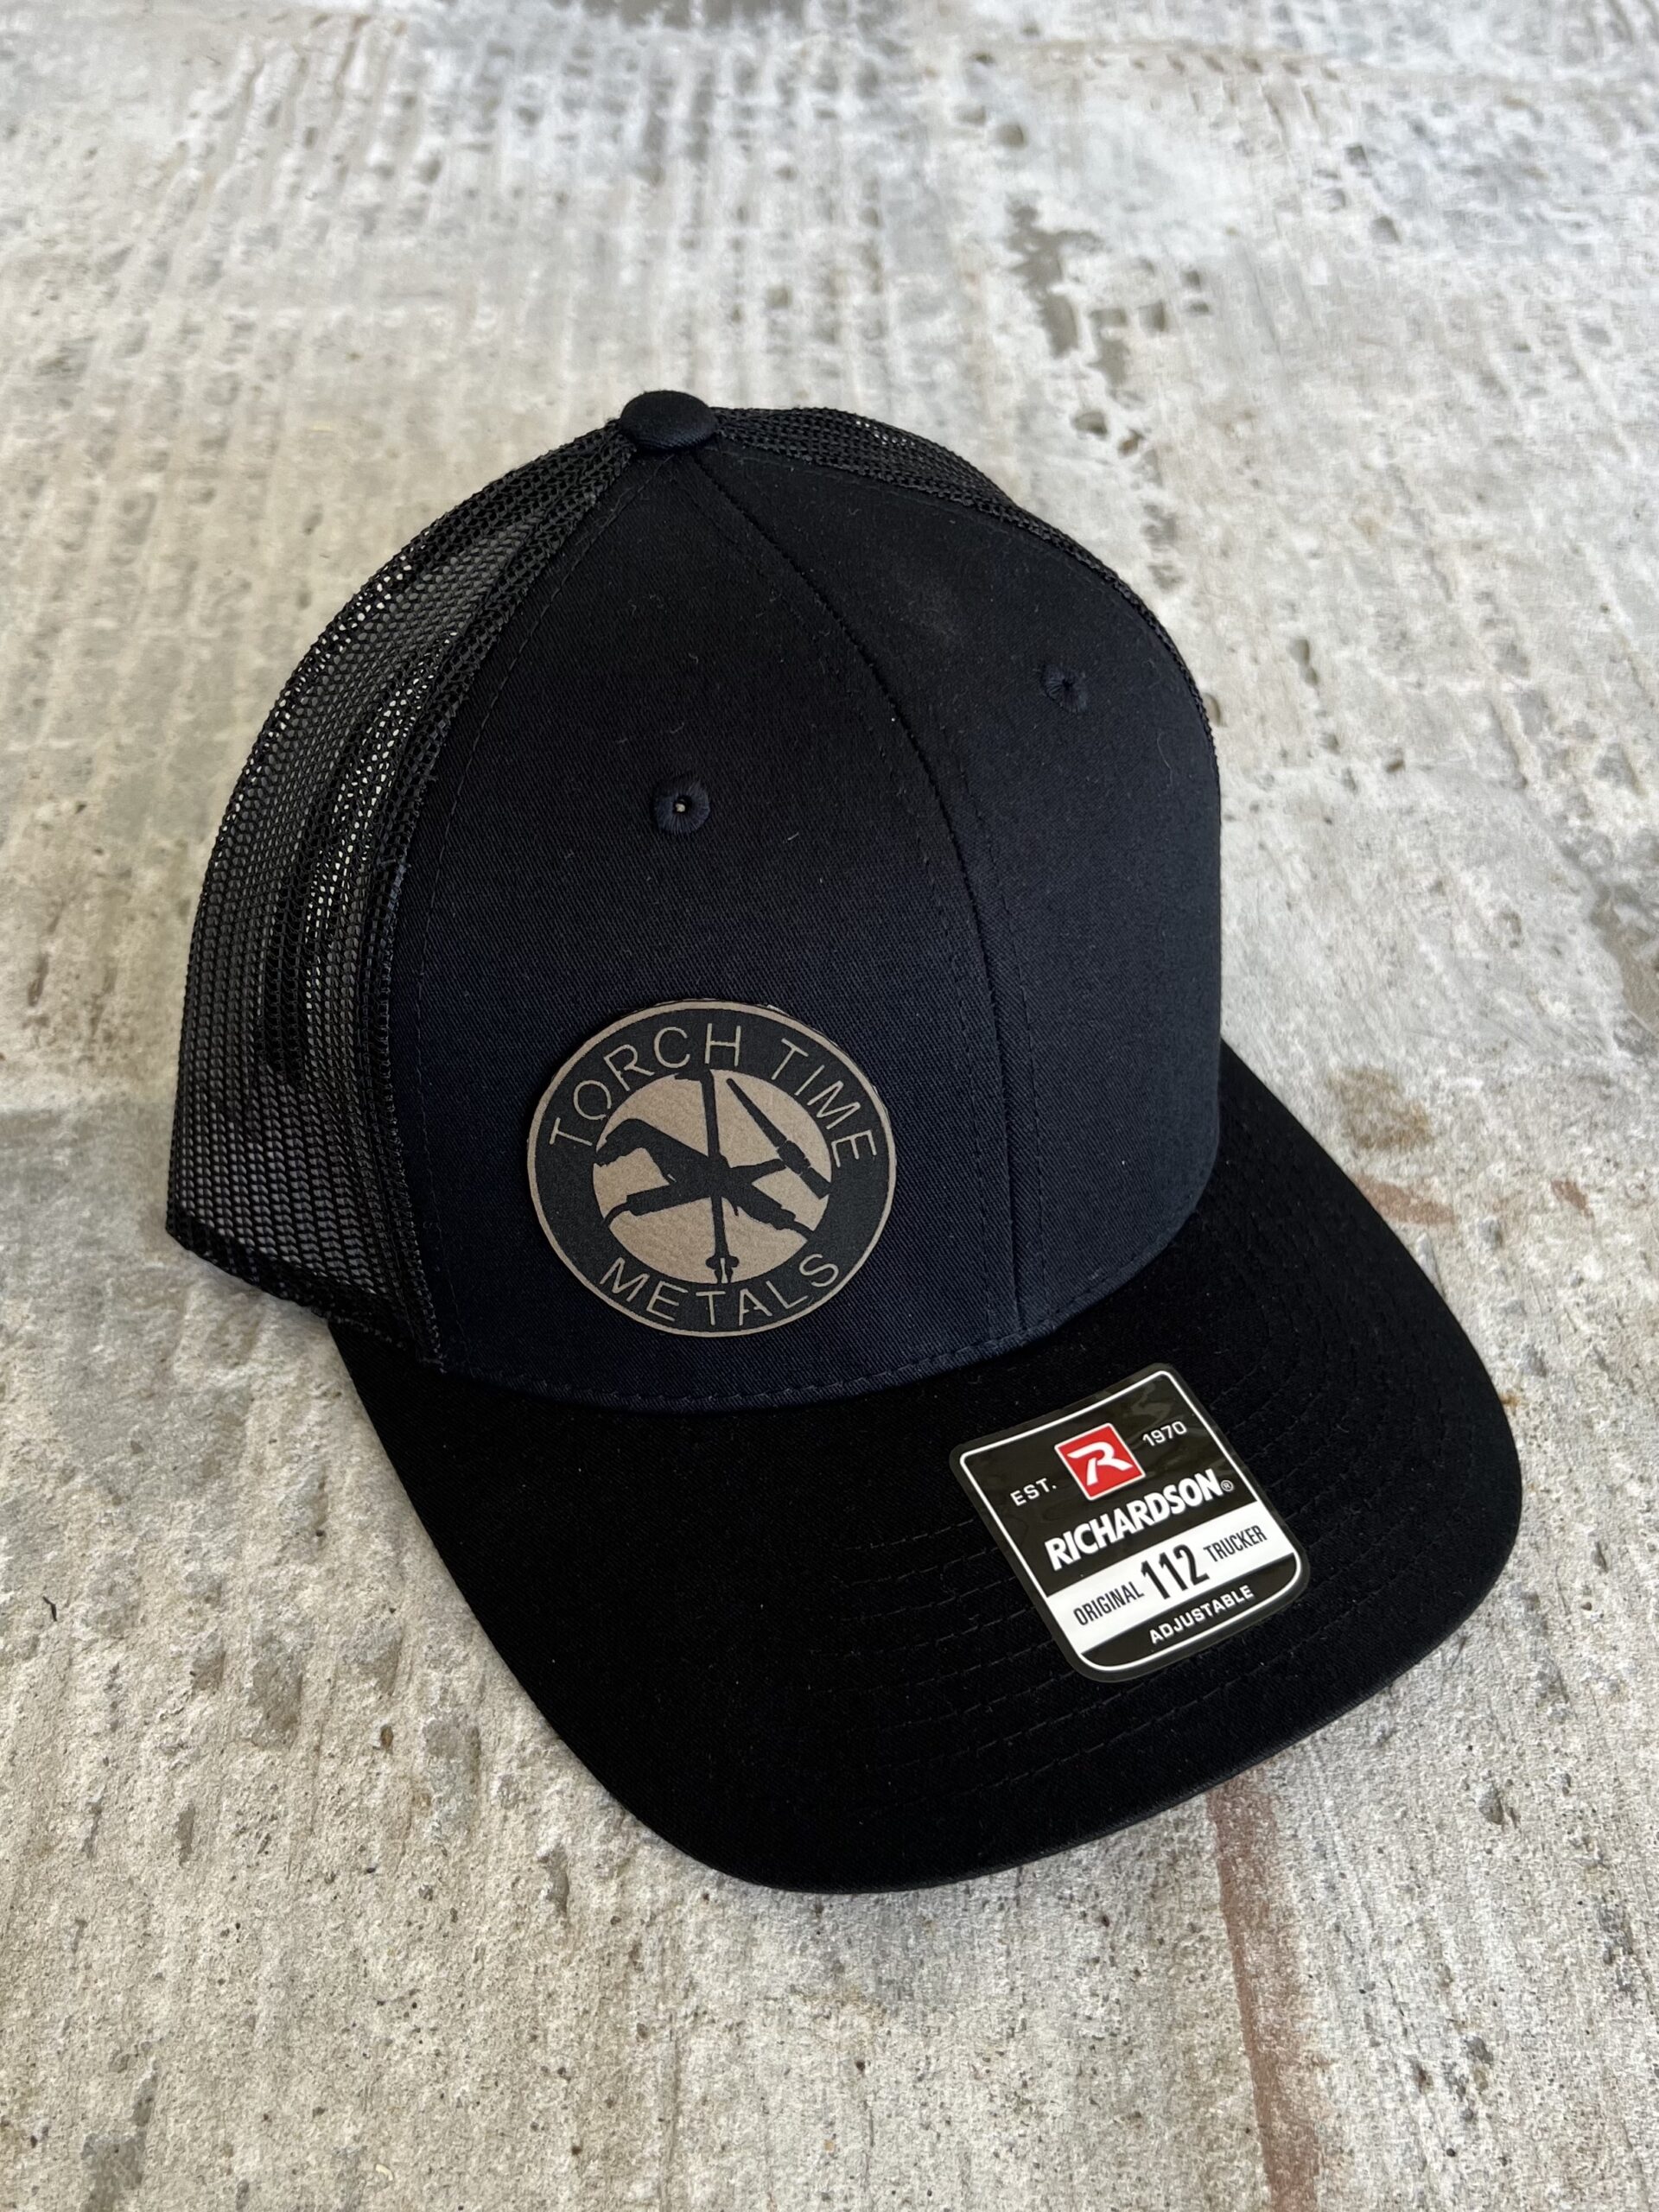 Solid Black Logo Hat – Torch Time Metals Inc.